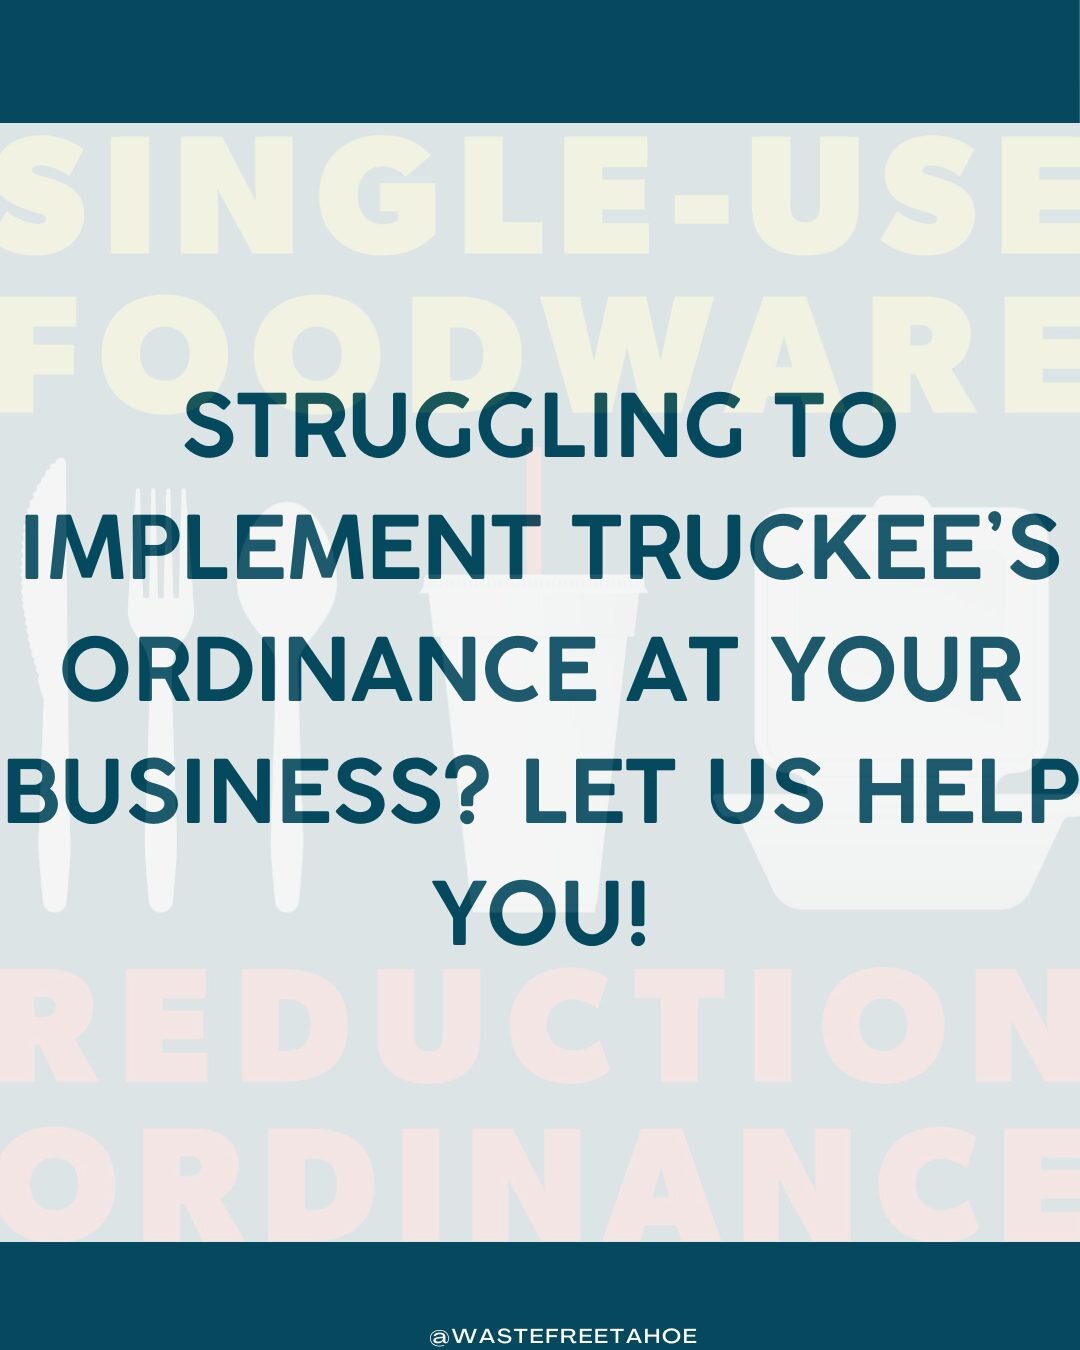 Do you need help implementing Truckee's disposable containers ordinance at your business? We can help you! Give us a call or send us an email to get started! m@wastefreetahoe.com 530 214 0975